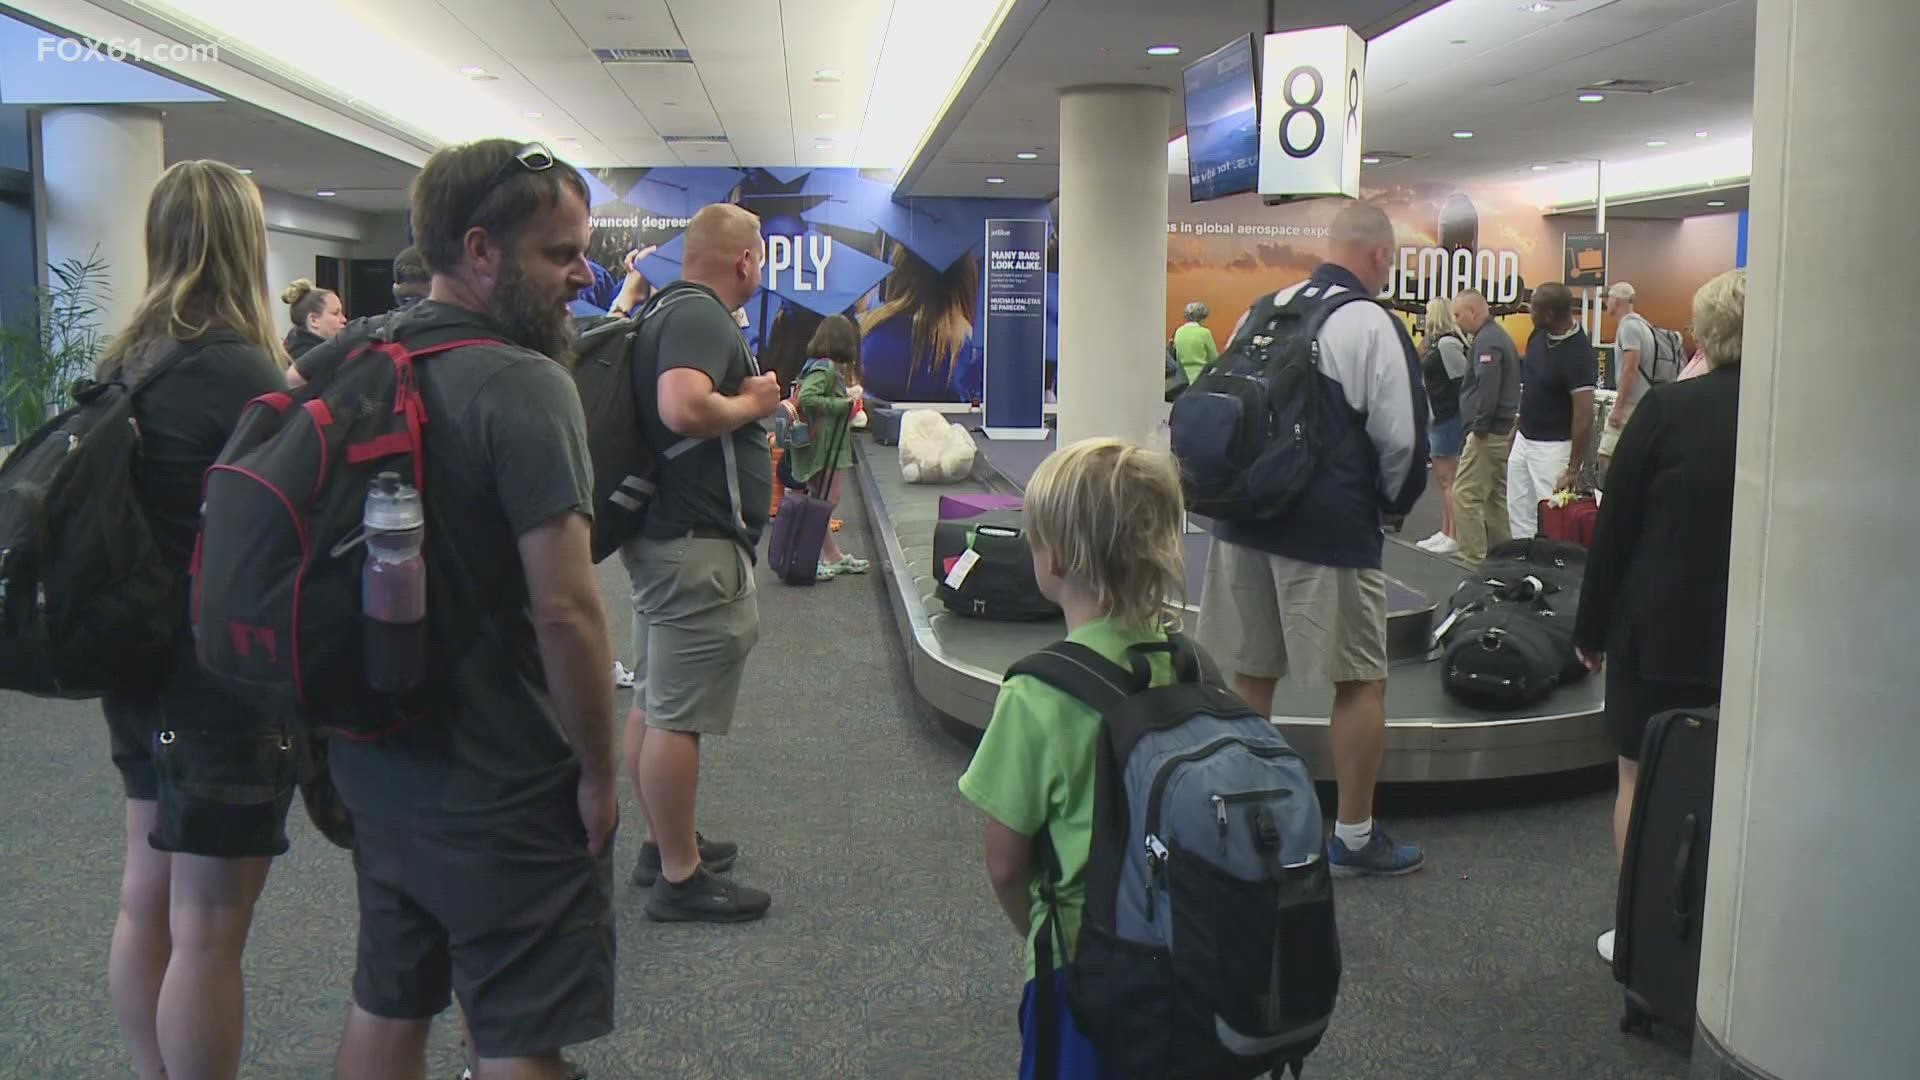 Families are catching the last flights headed home from Florida to make it back before the hurricane.